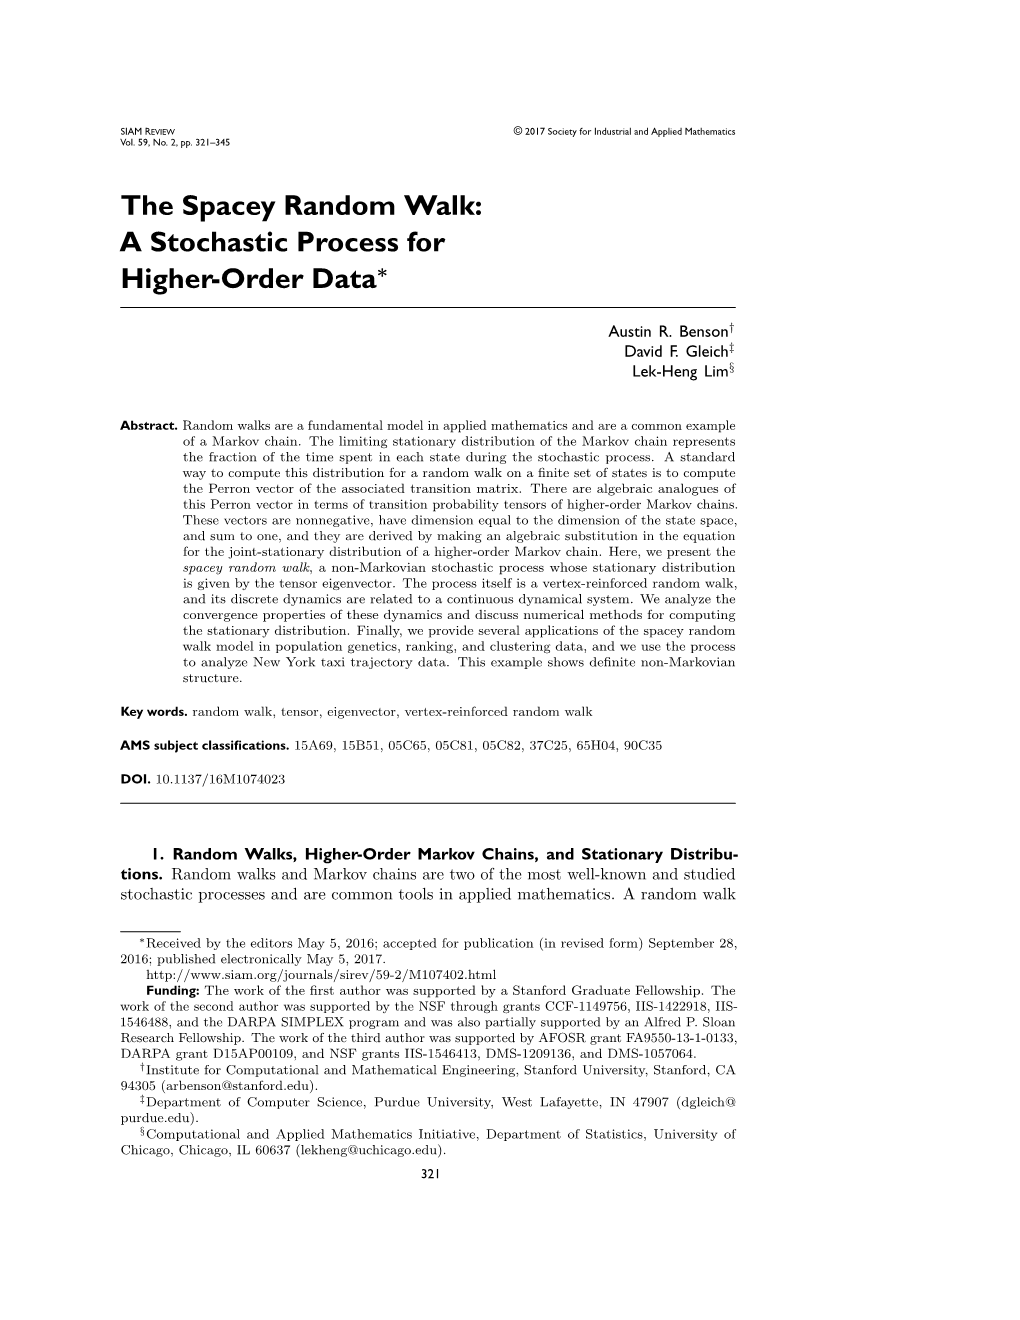 The Spacey Random Walk: a Stochastic Process for Higher-Order Data∗